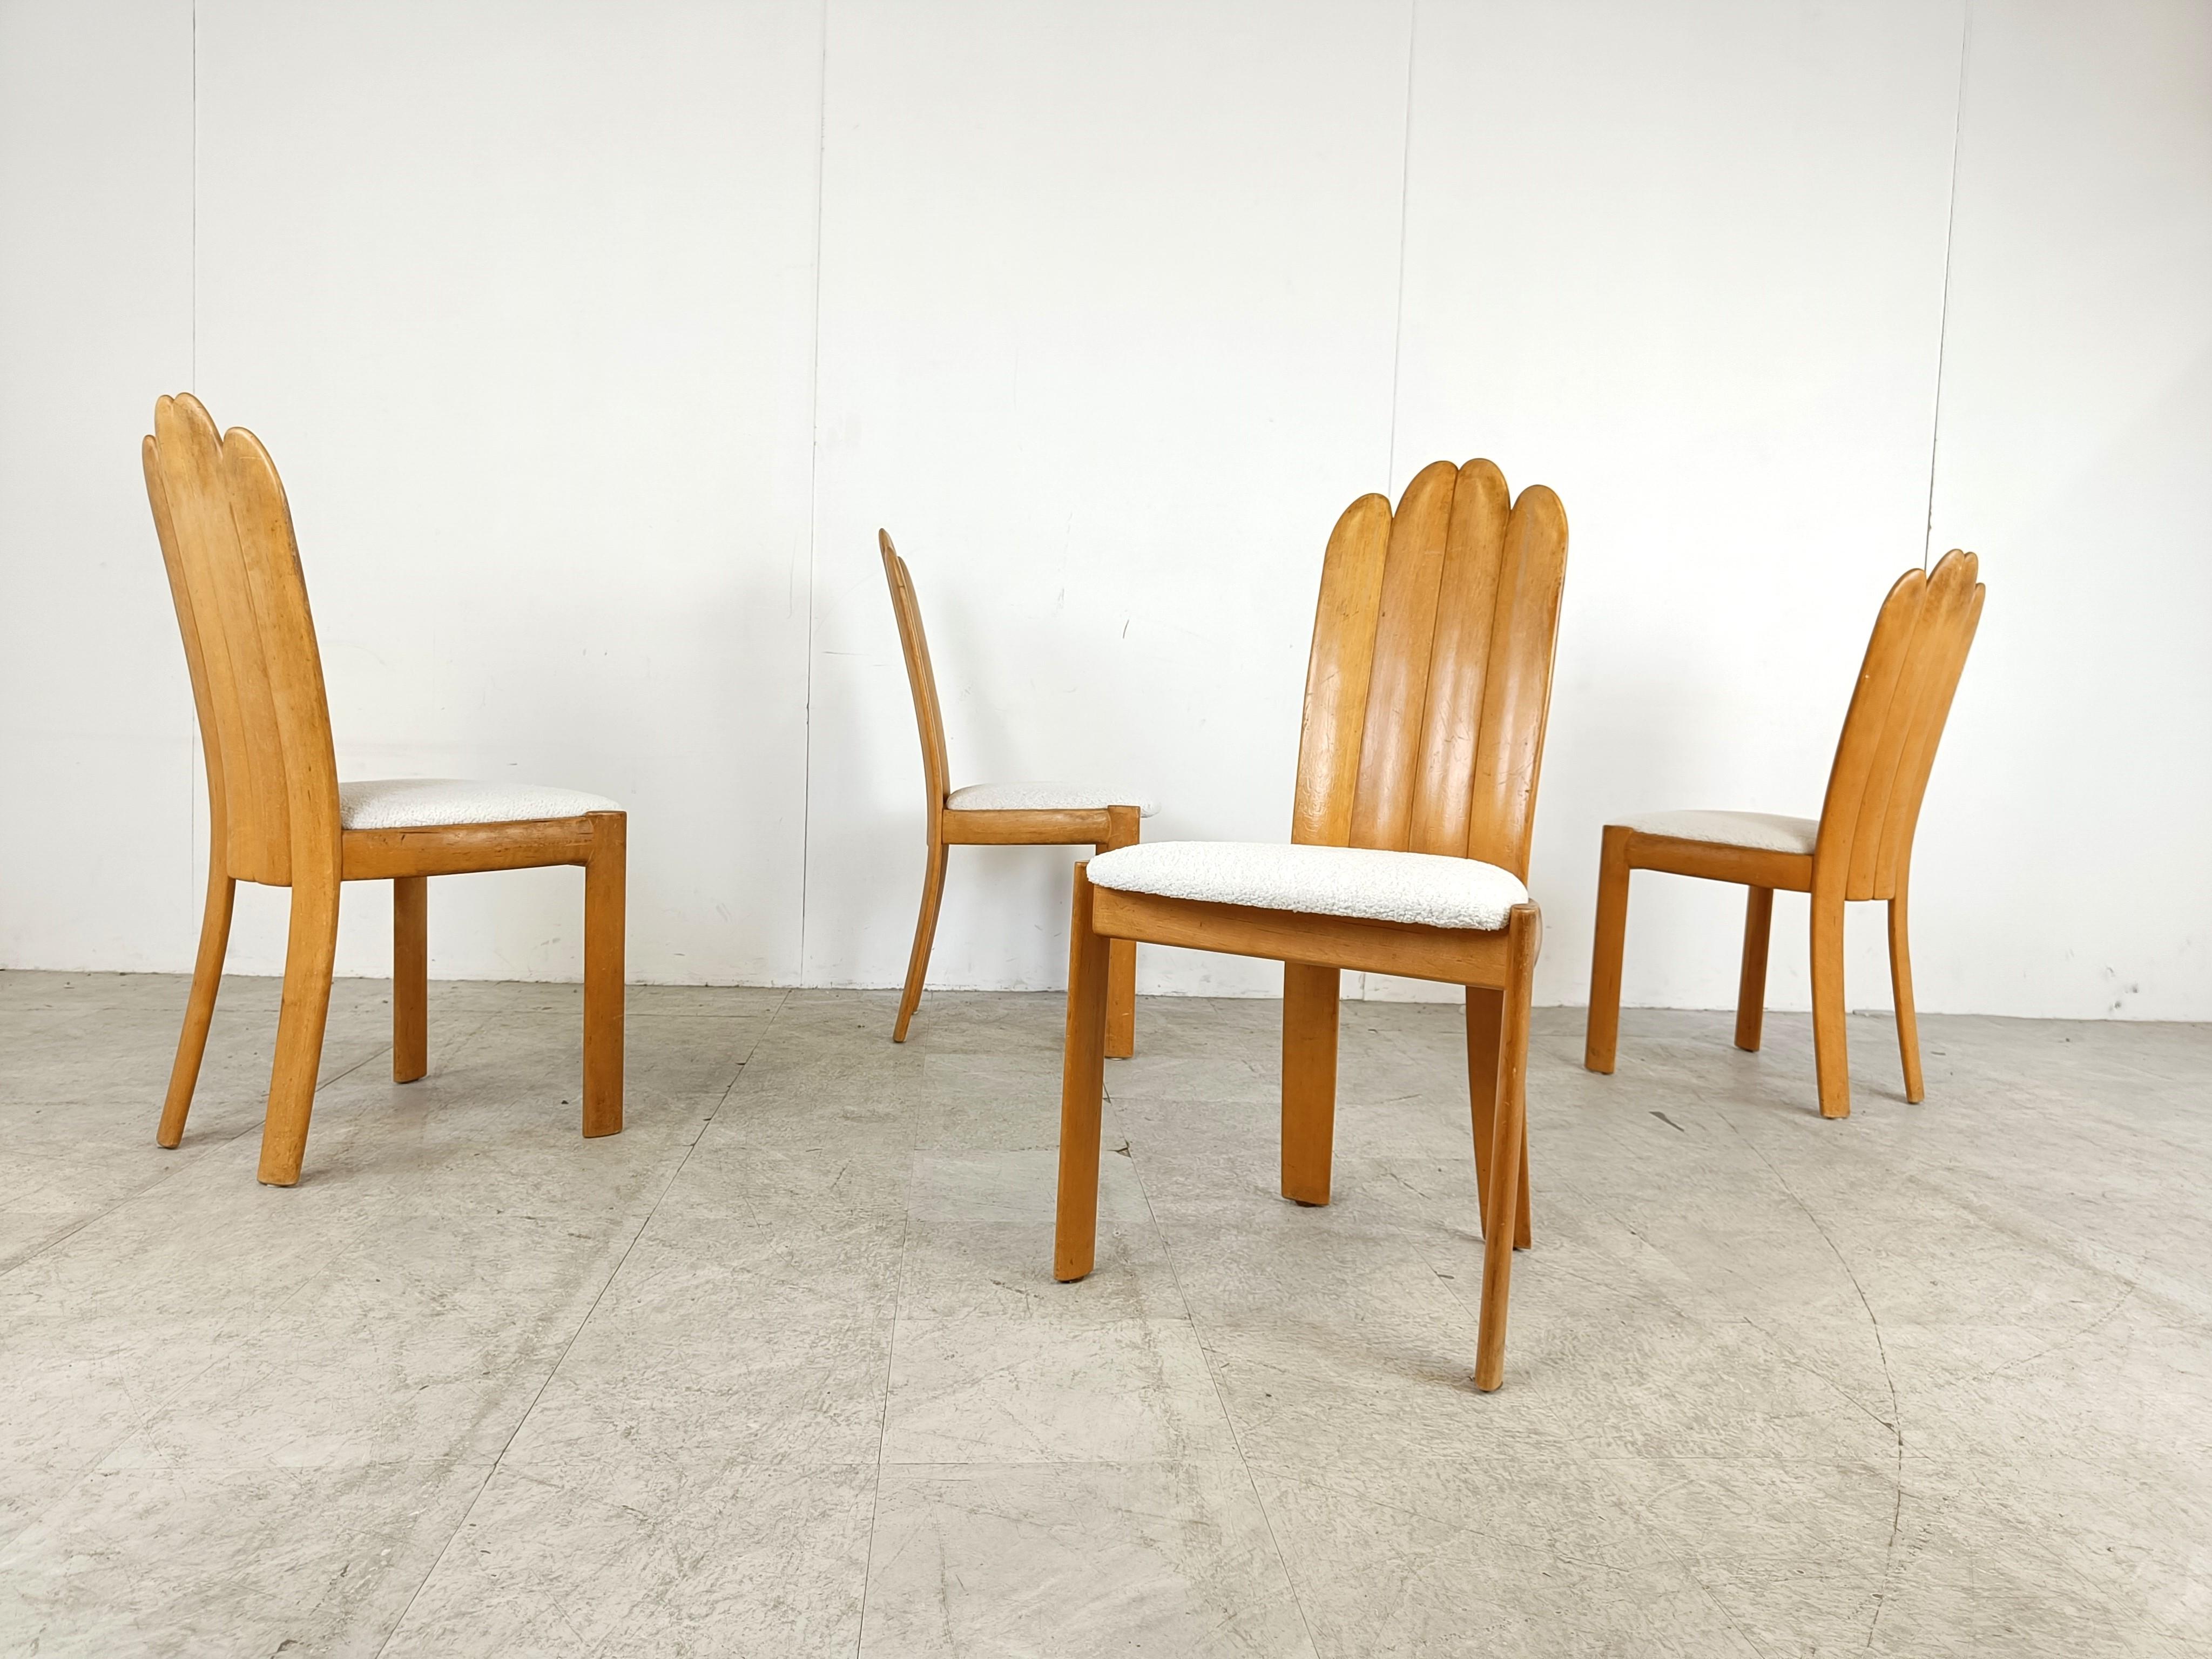 Set of 4 scandinavian dining chairs by Vamdrup Stolefabrik, 1960s For Sale 2